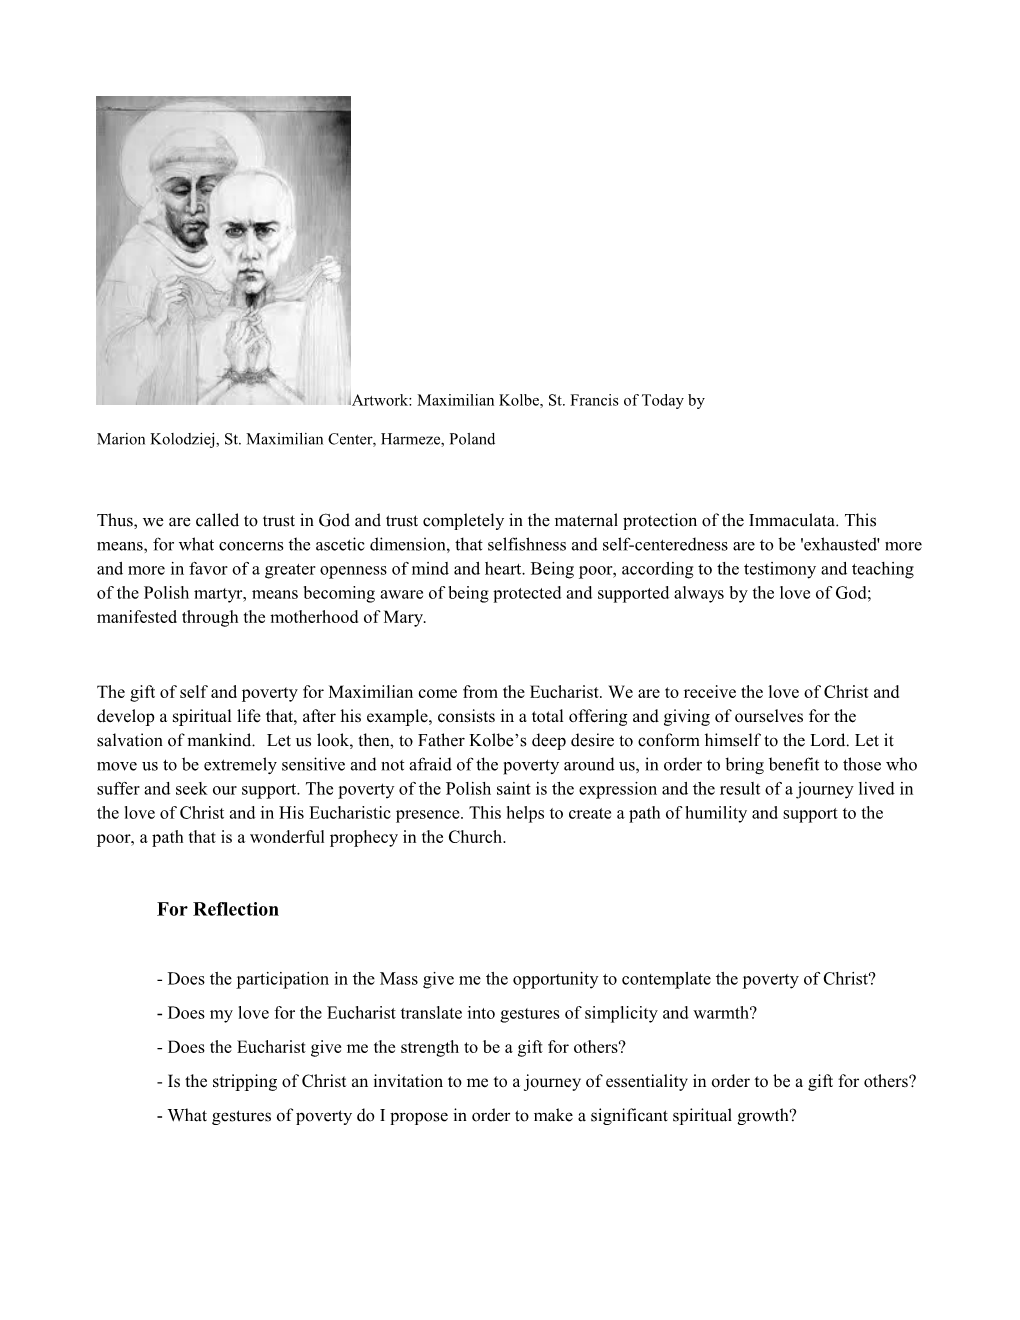 The Eucharist, Central to Kolbe S Life of Poverty